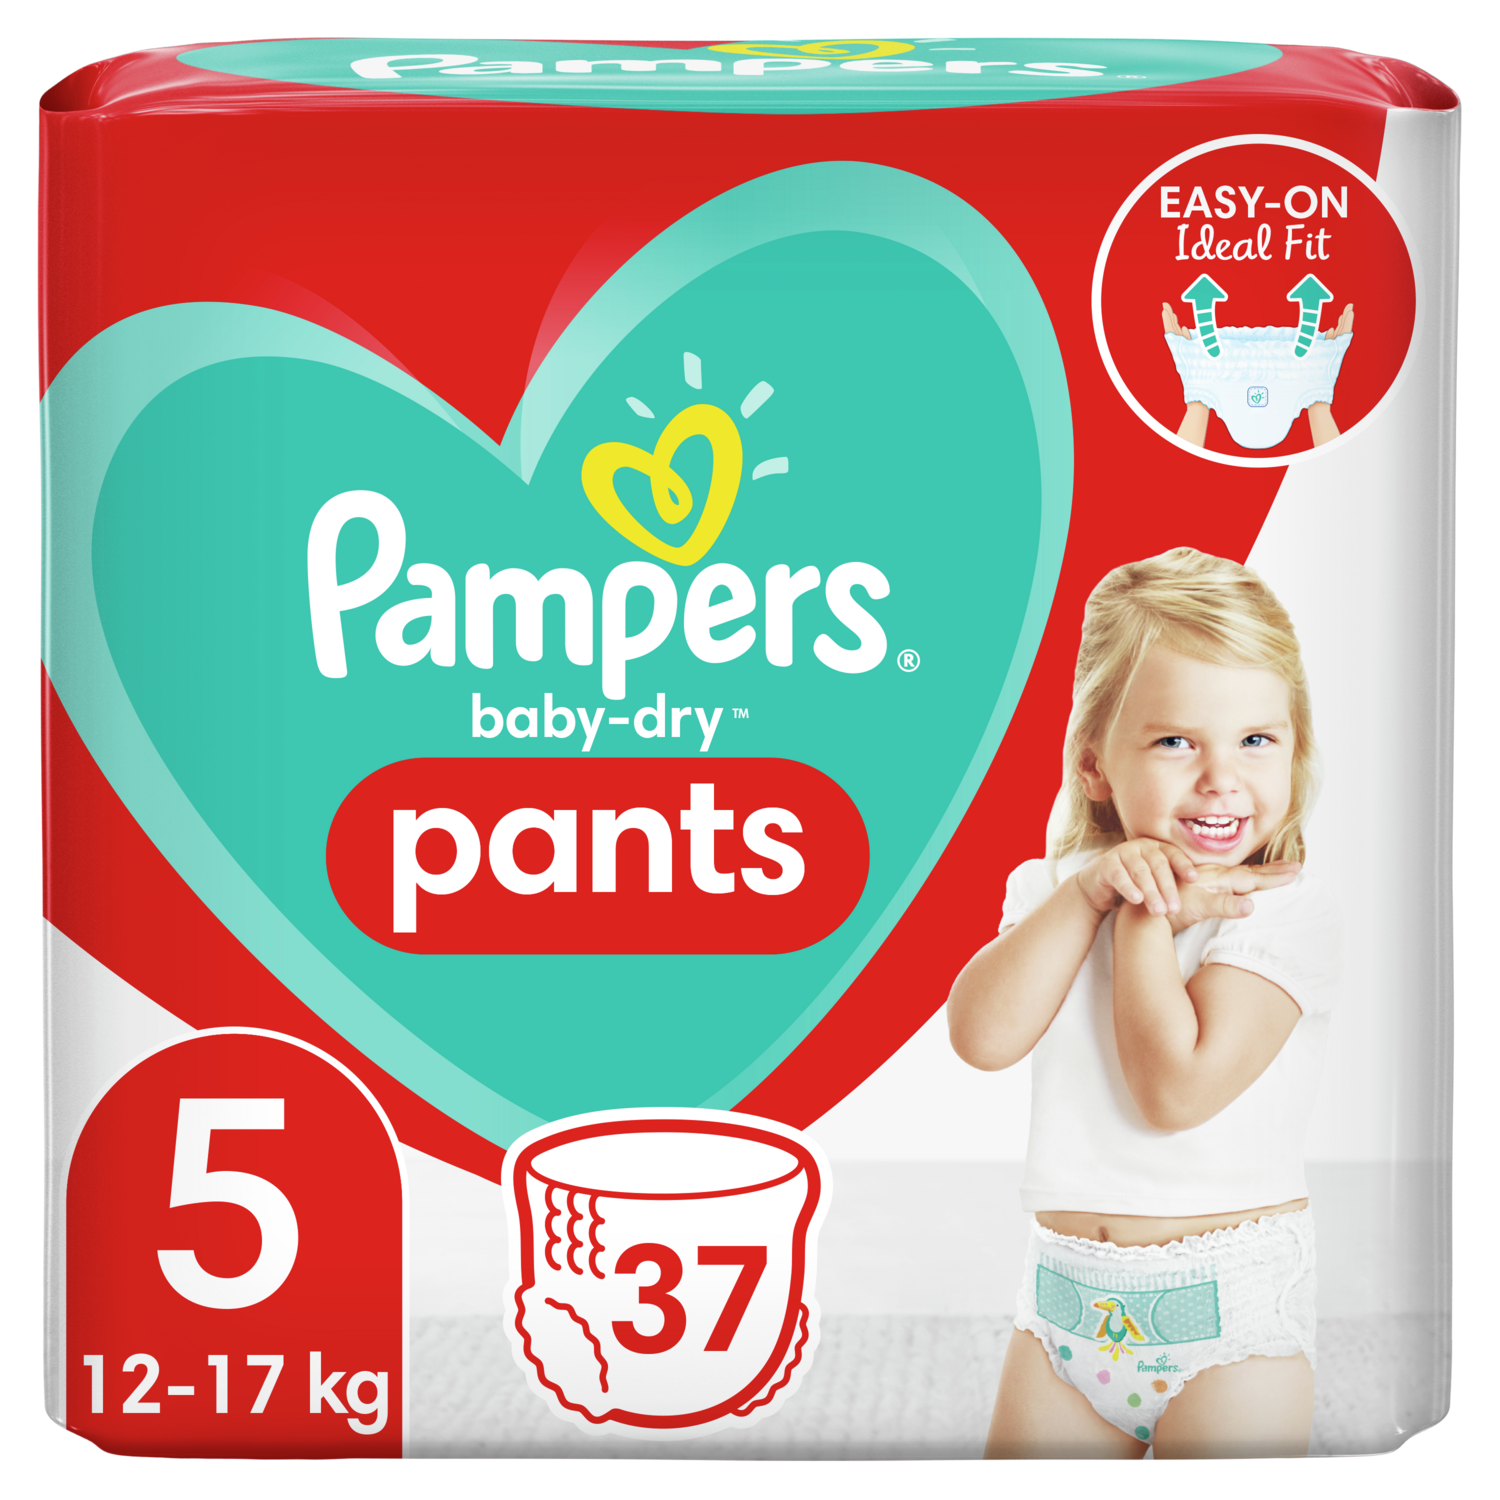 PAMPERS Baby-dry pants couches-culottes taille 5 (12-17kg) 38 couches pas  cher 